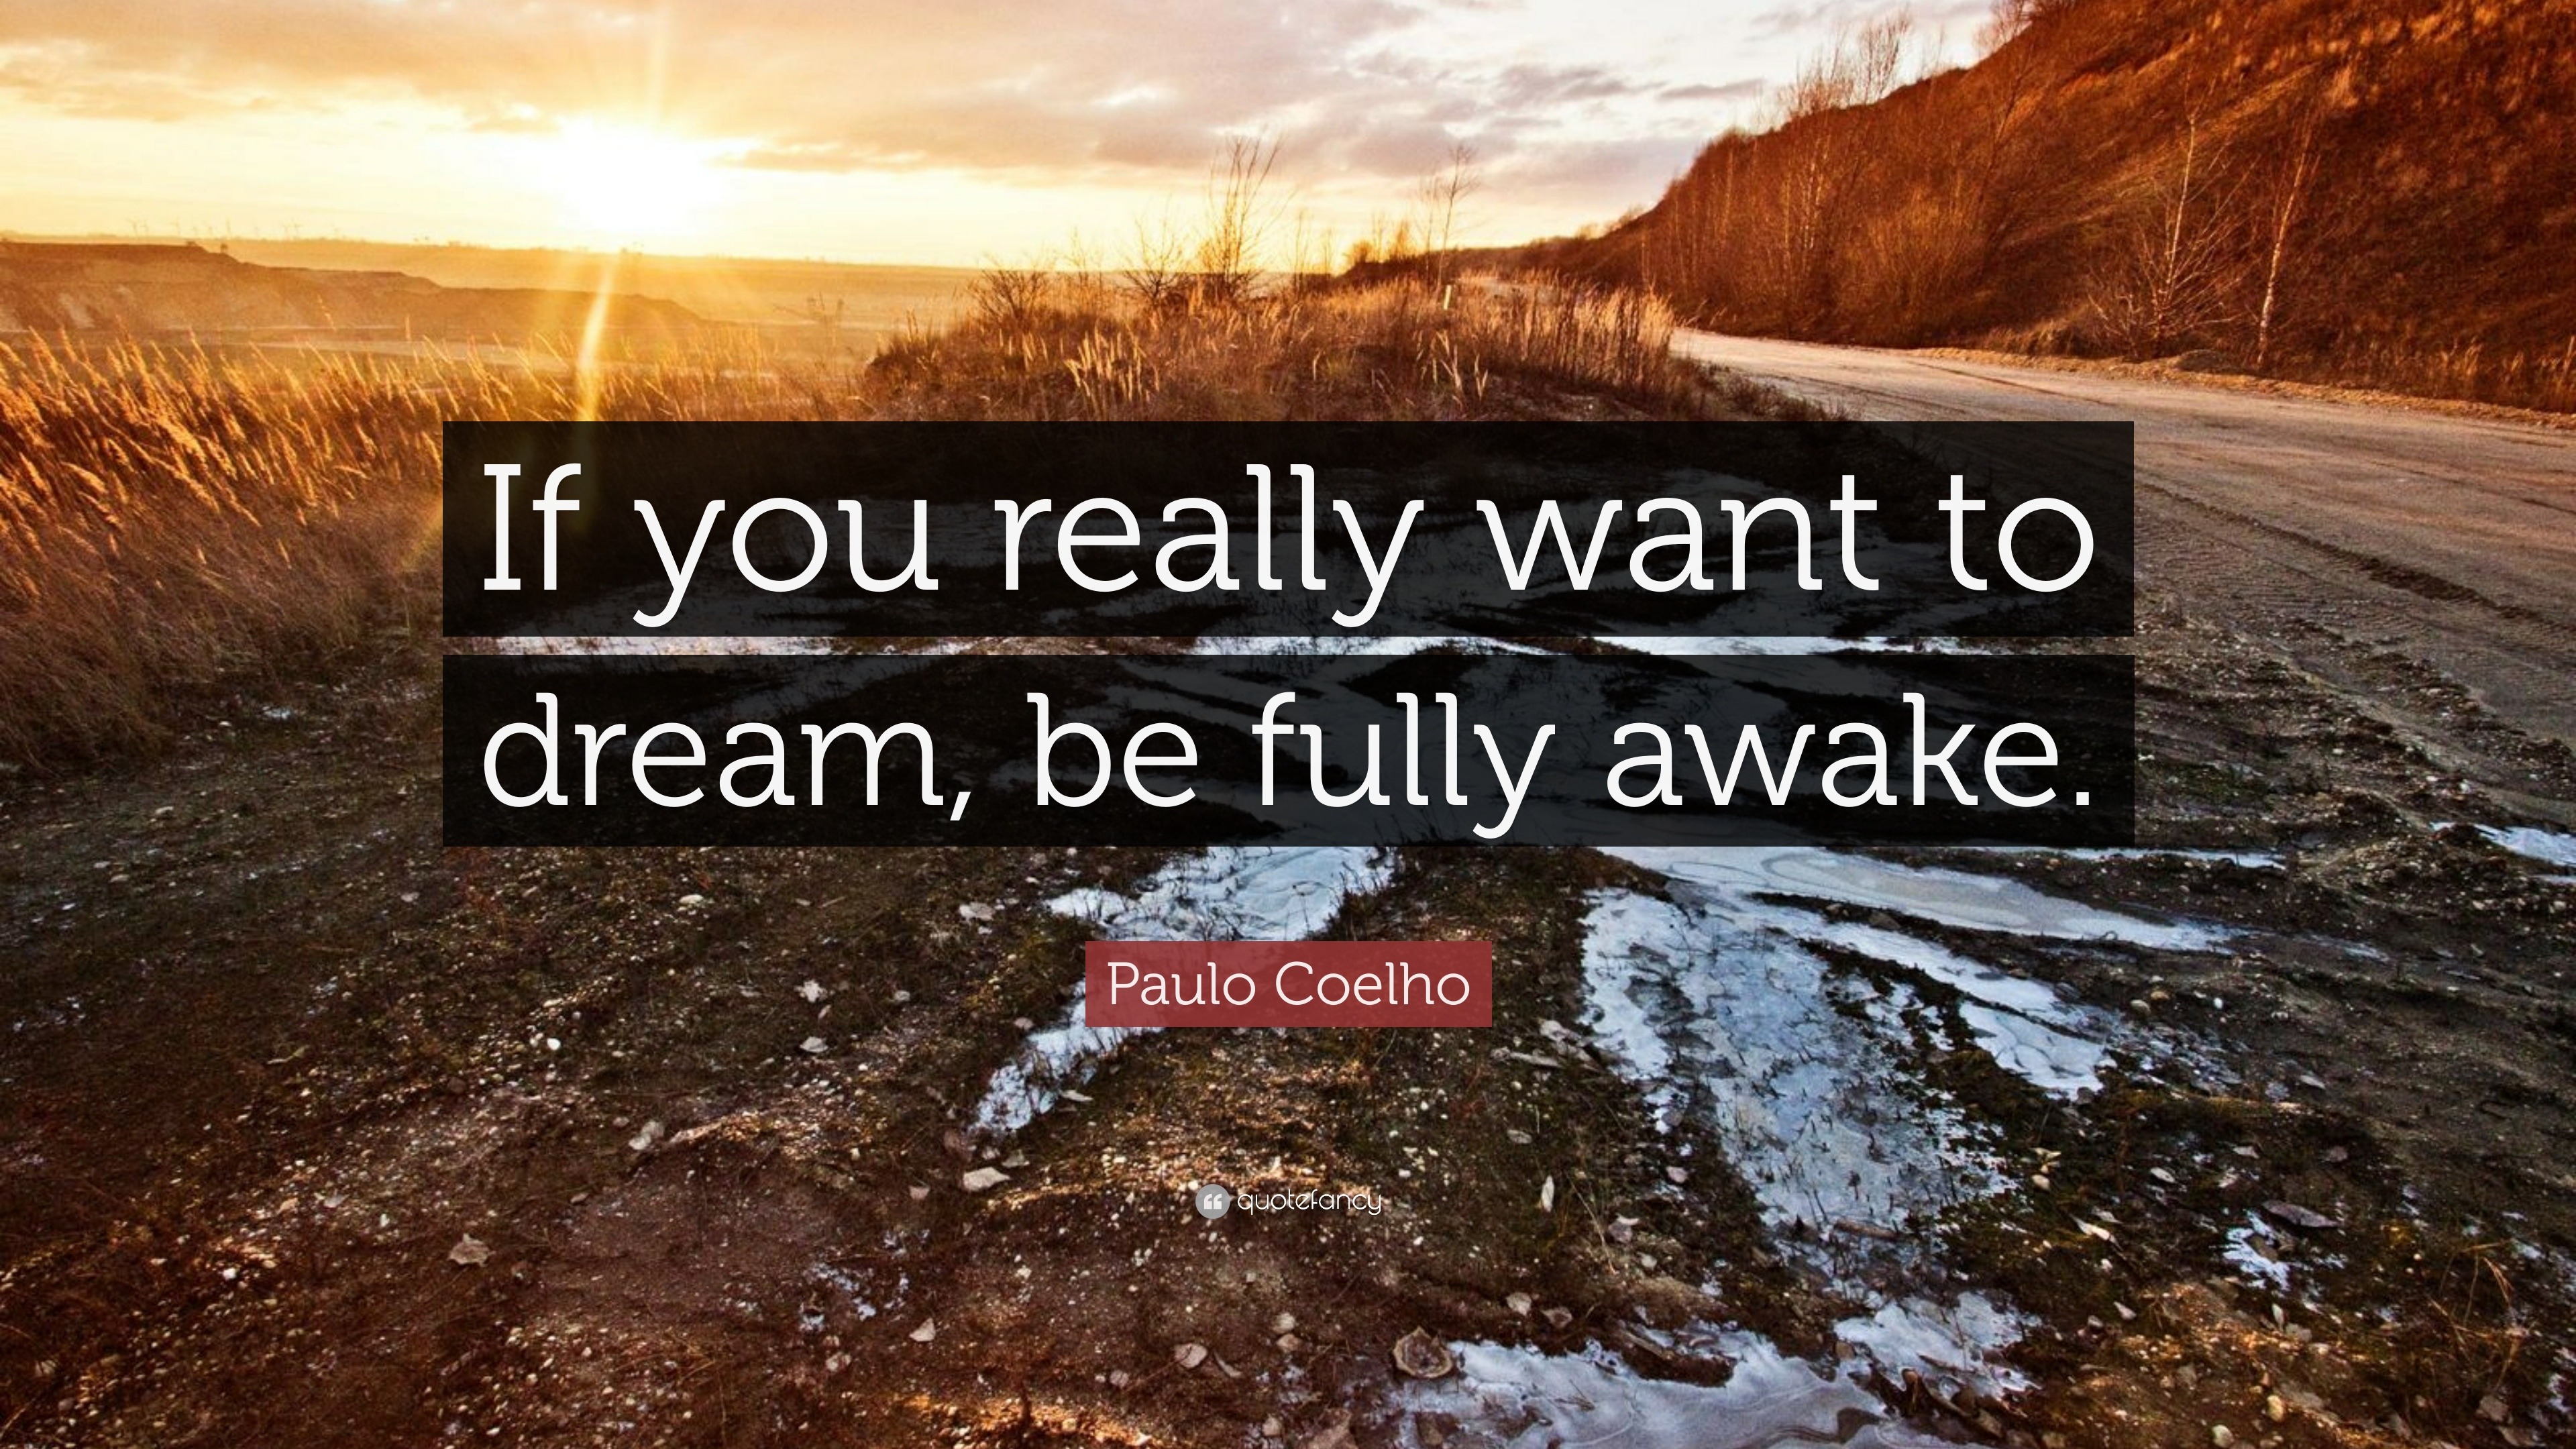 Paulo Coelho Quote: “If you really want to dream, be fully awake.”